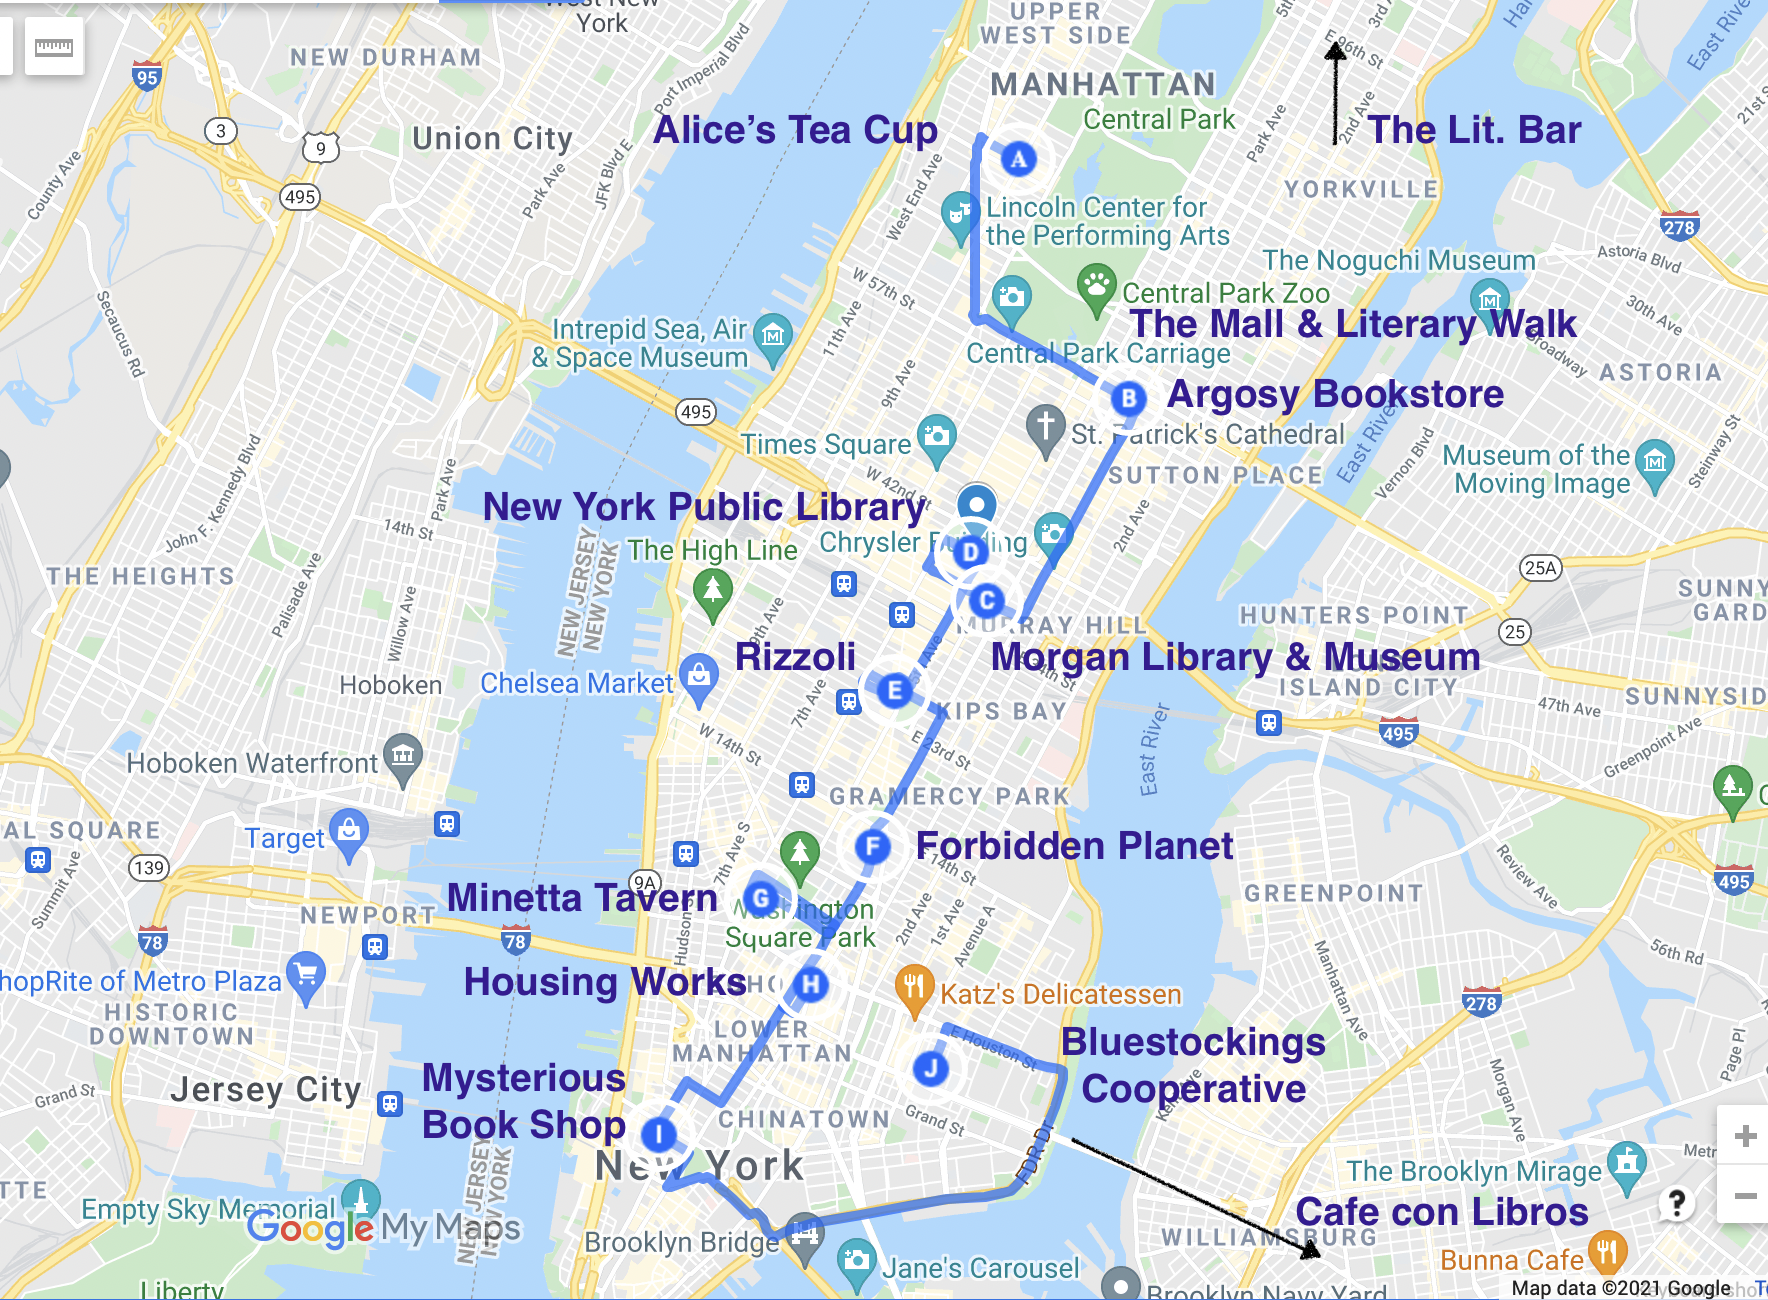 road trip map of literary spots in new york city, primarily manhattan